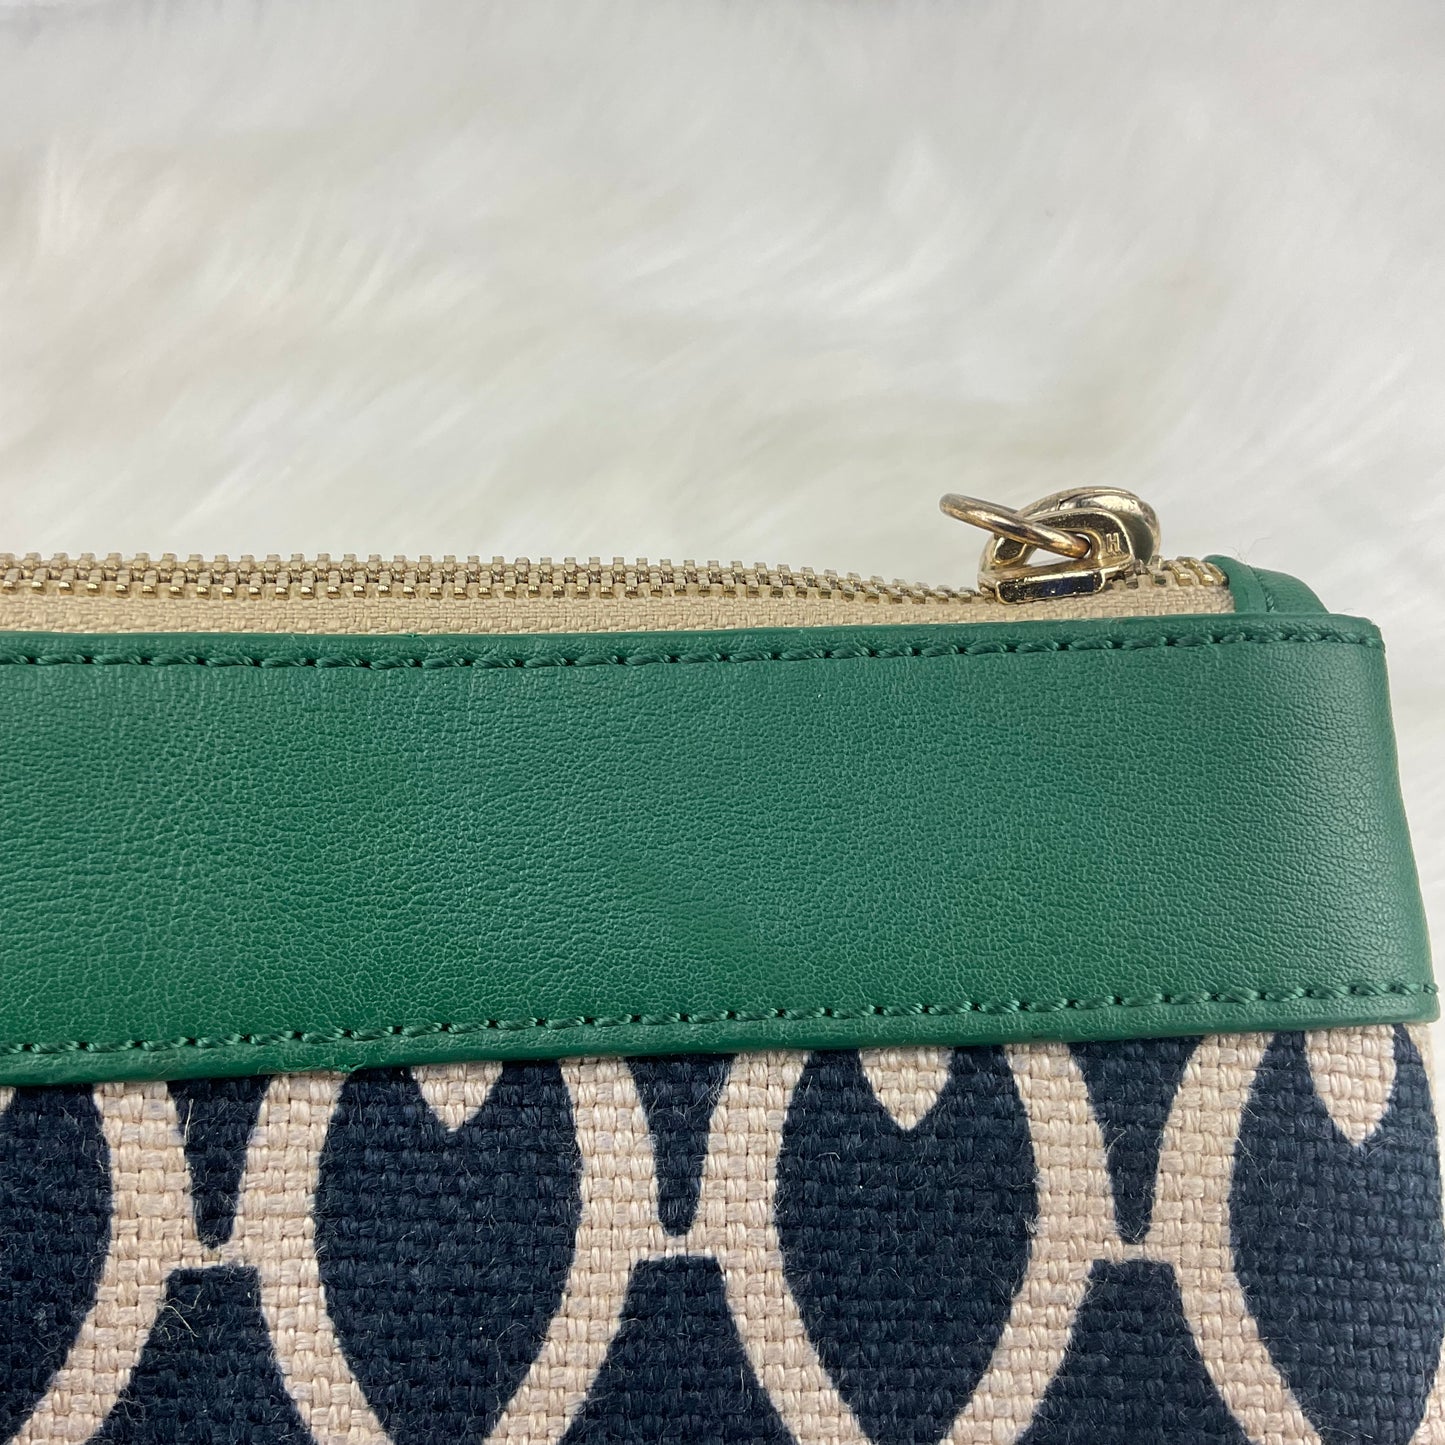 Wristlet Designer By Spartina  Size: Small